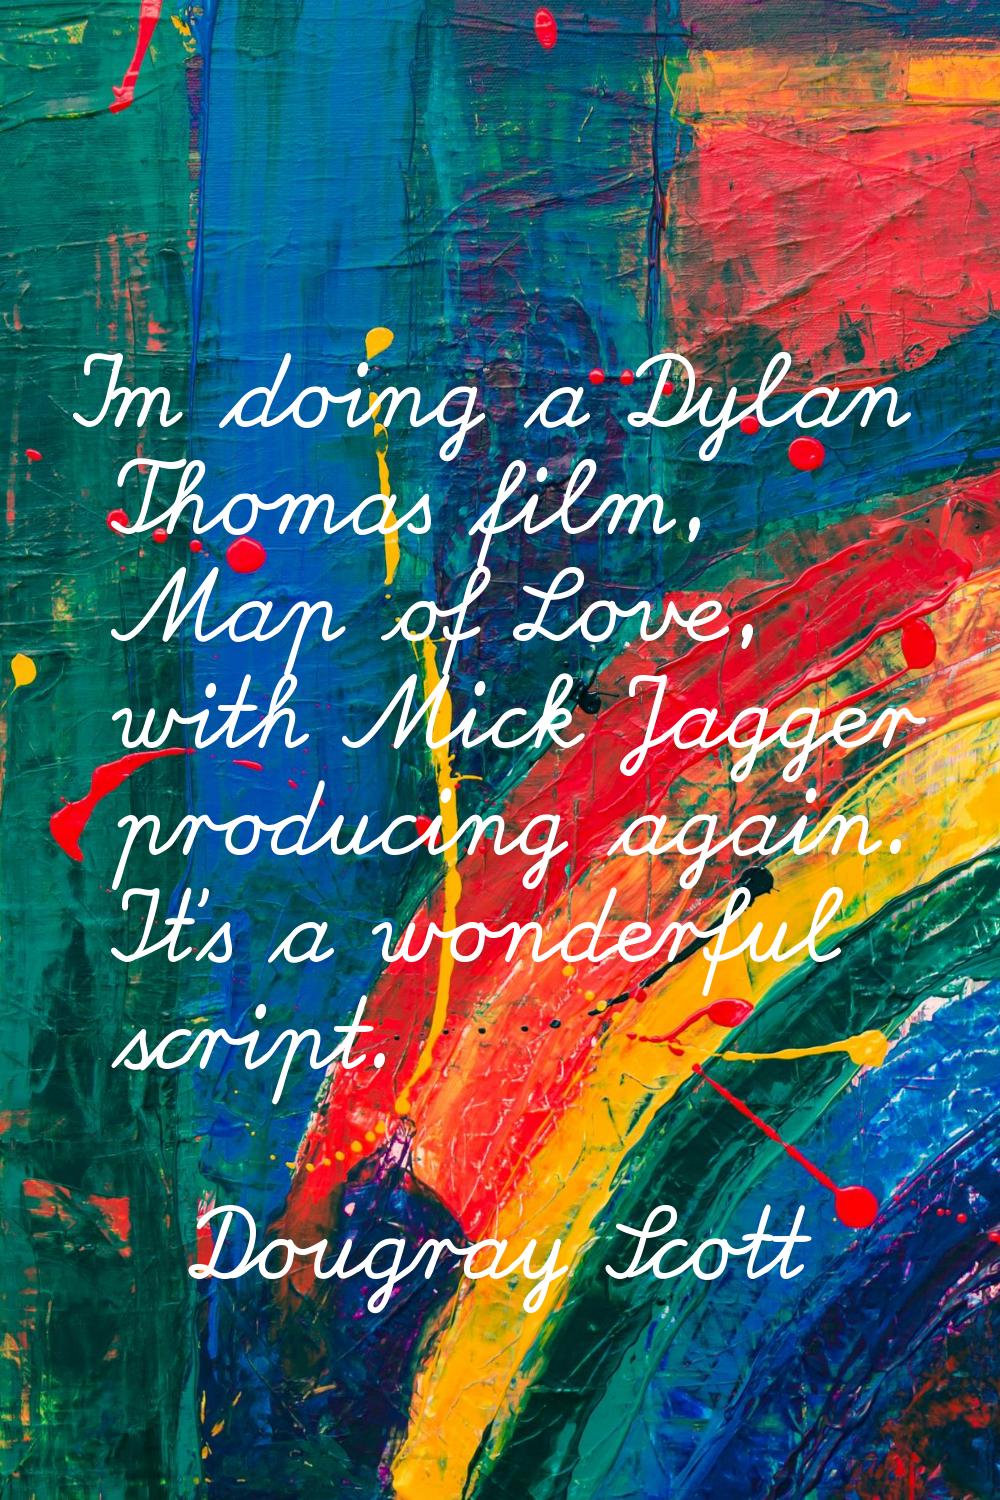 I'm doing a Dylan Thomas film, Map of Love, with Mick Jagger producing again. It's a wonderful scri